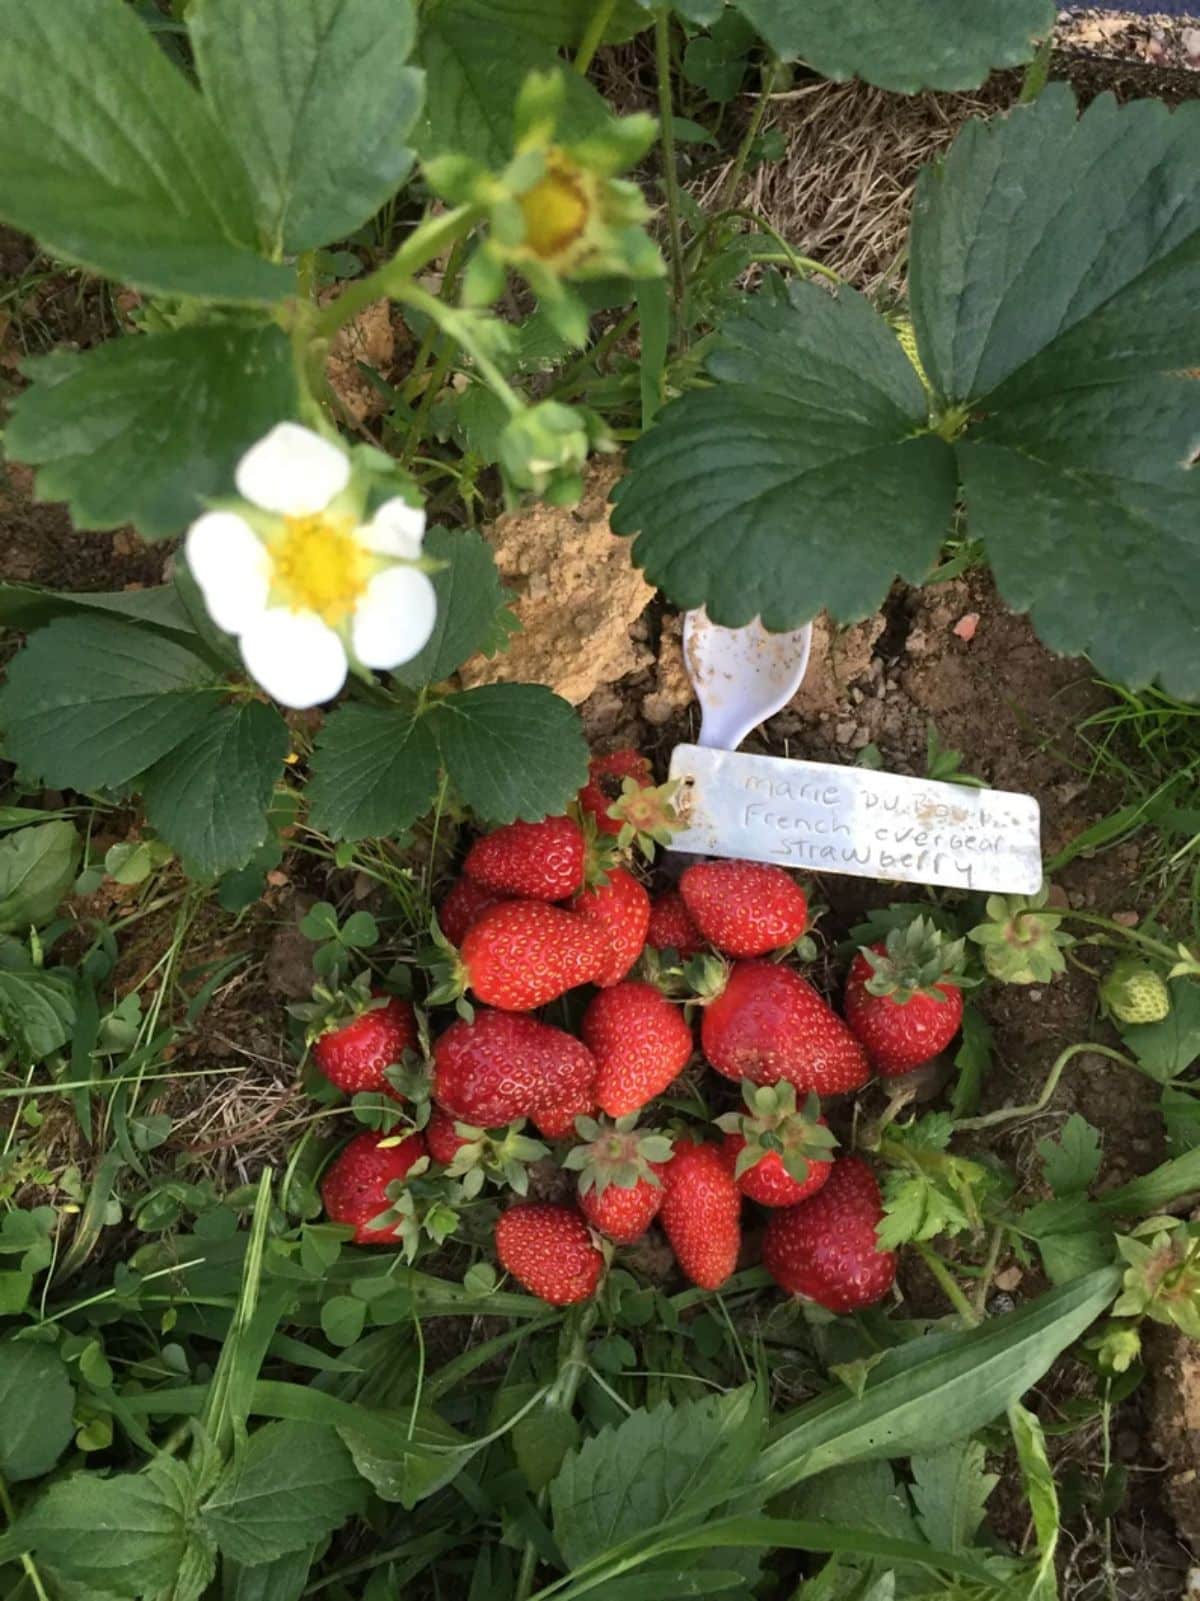 Ripe Mara Des Bois Strawberries on a field with a label.